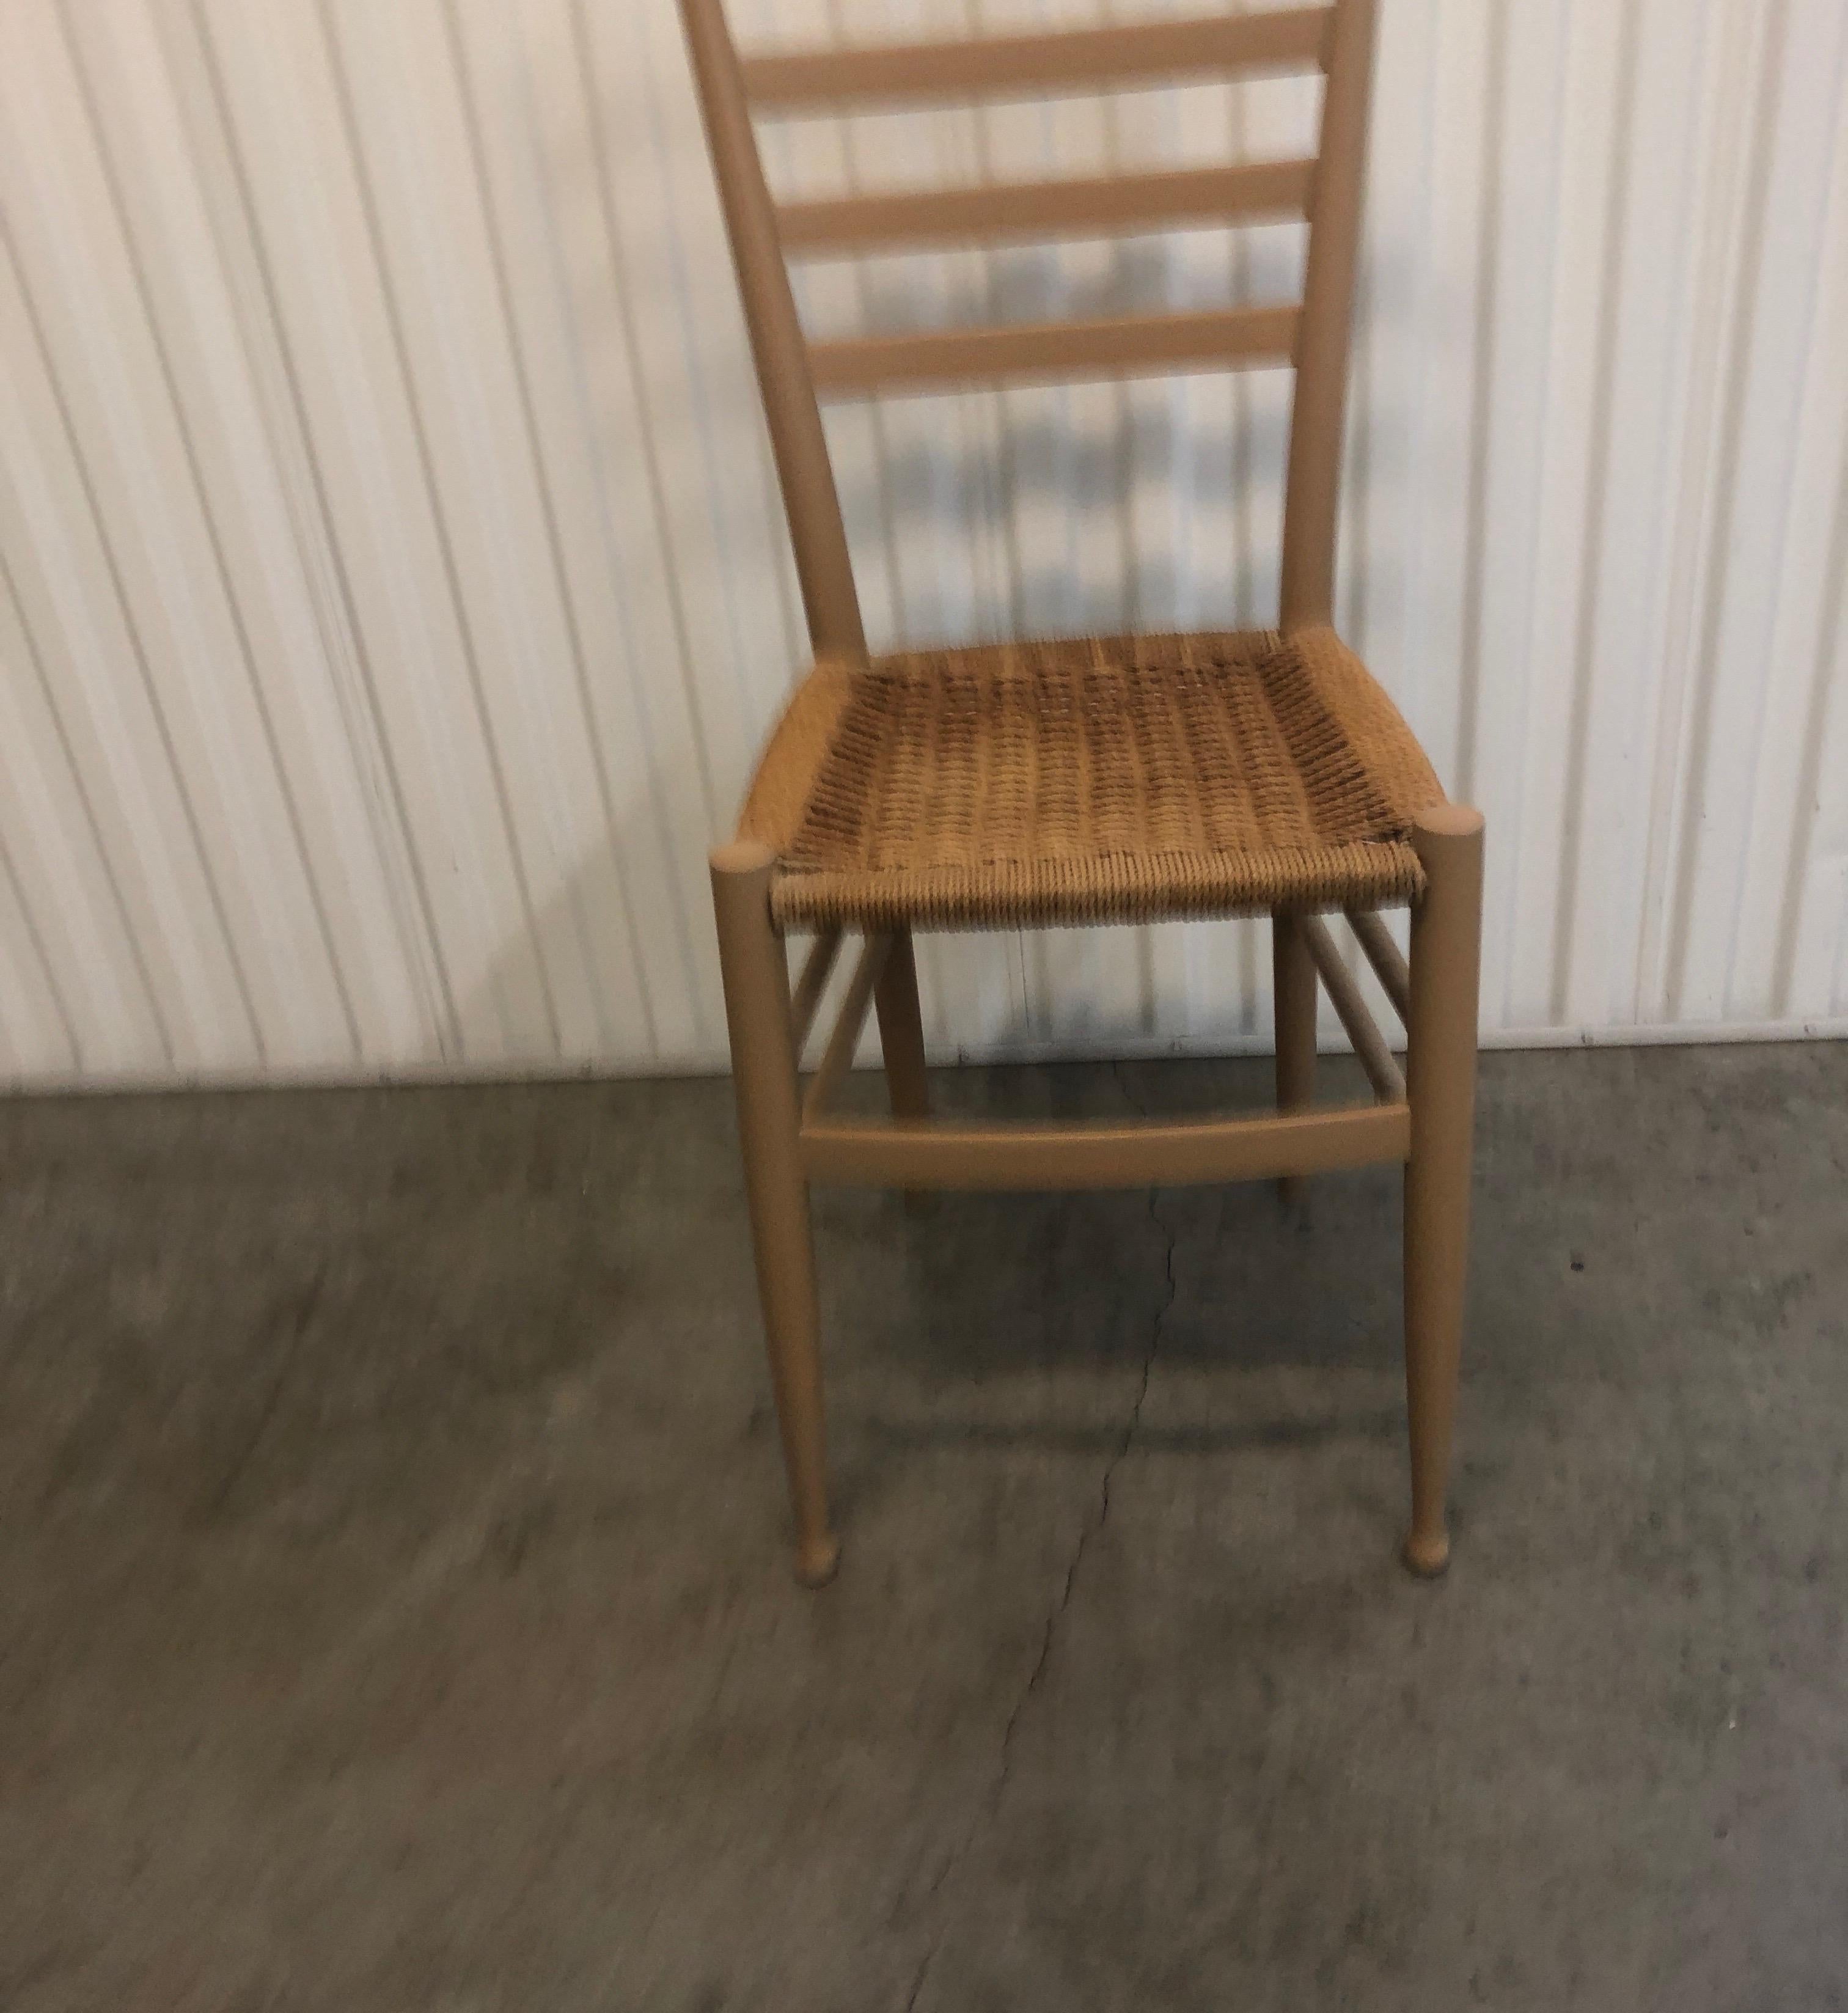 Italian painted side chair with woven seat and ladder back.
aka Rush Seat.
Size: 15 W x 13.5 SD x 18.5 SH x 36.5 BH.